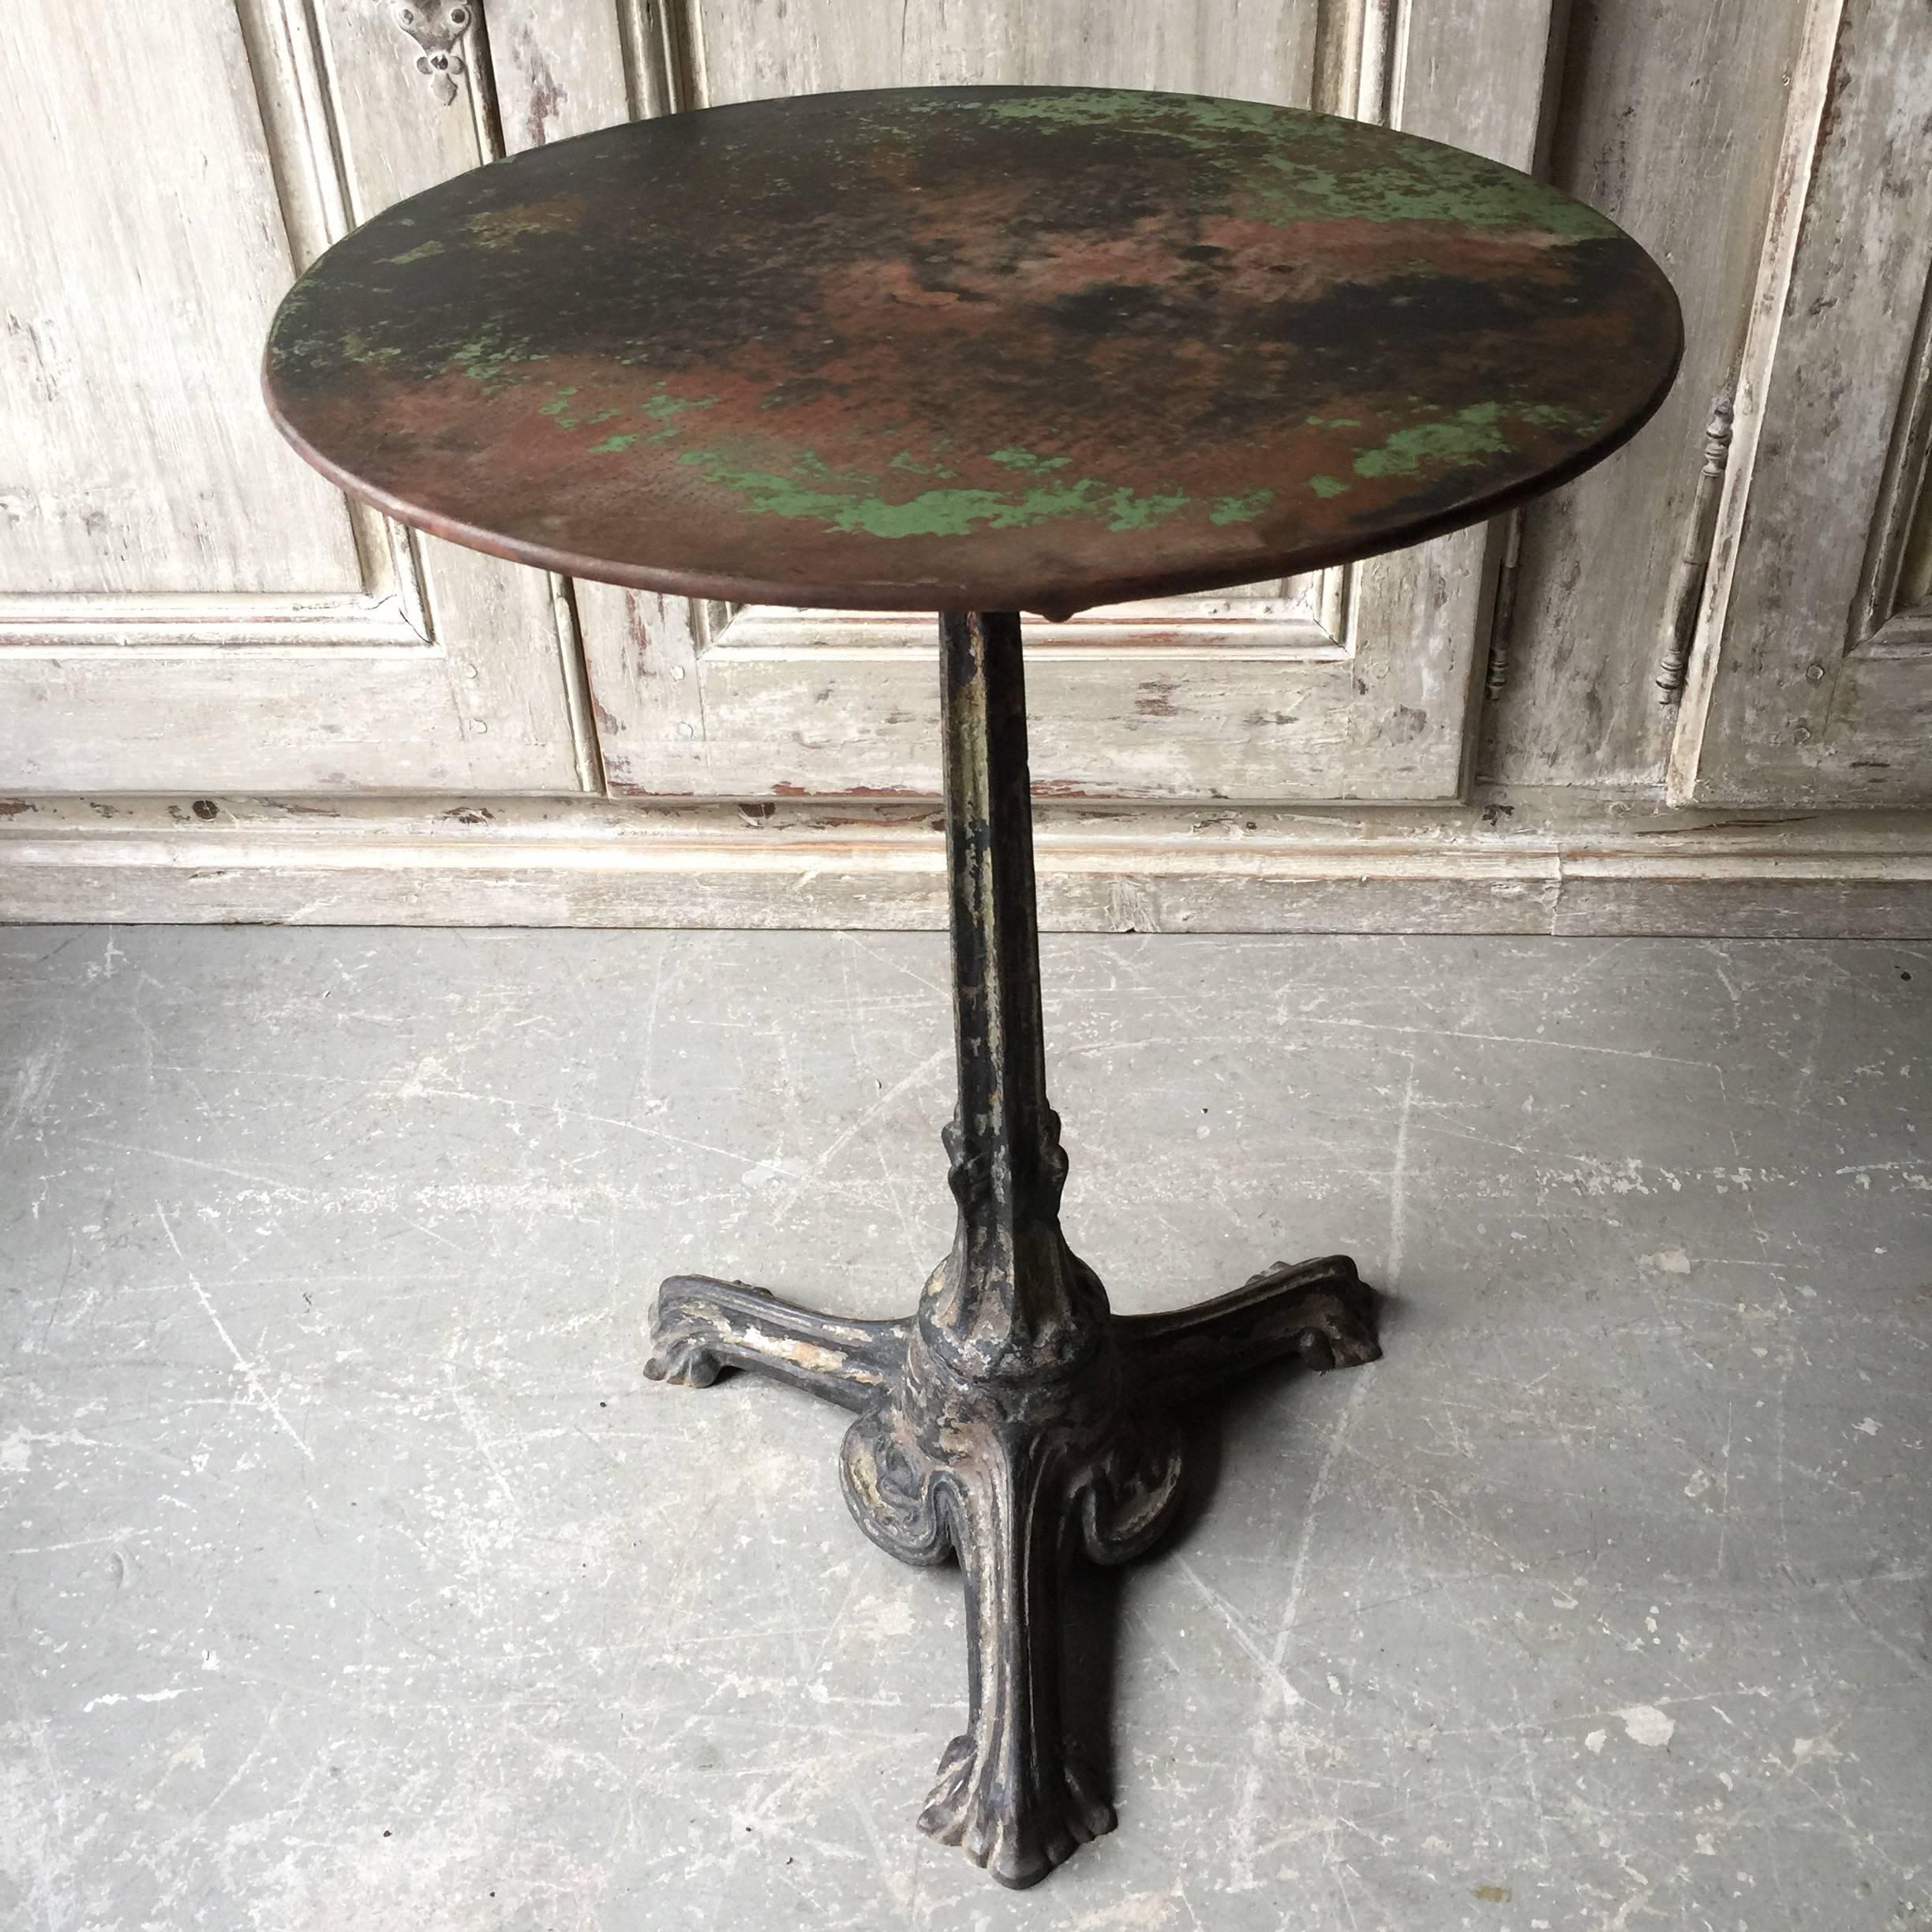 Antique French garden or bistro table with beautifully aged and weathered green paint, France. Early to mid-20th century.
Here are few examples, surprising pieces and objects, authentic, decorative and rare items that you will only see in our